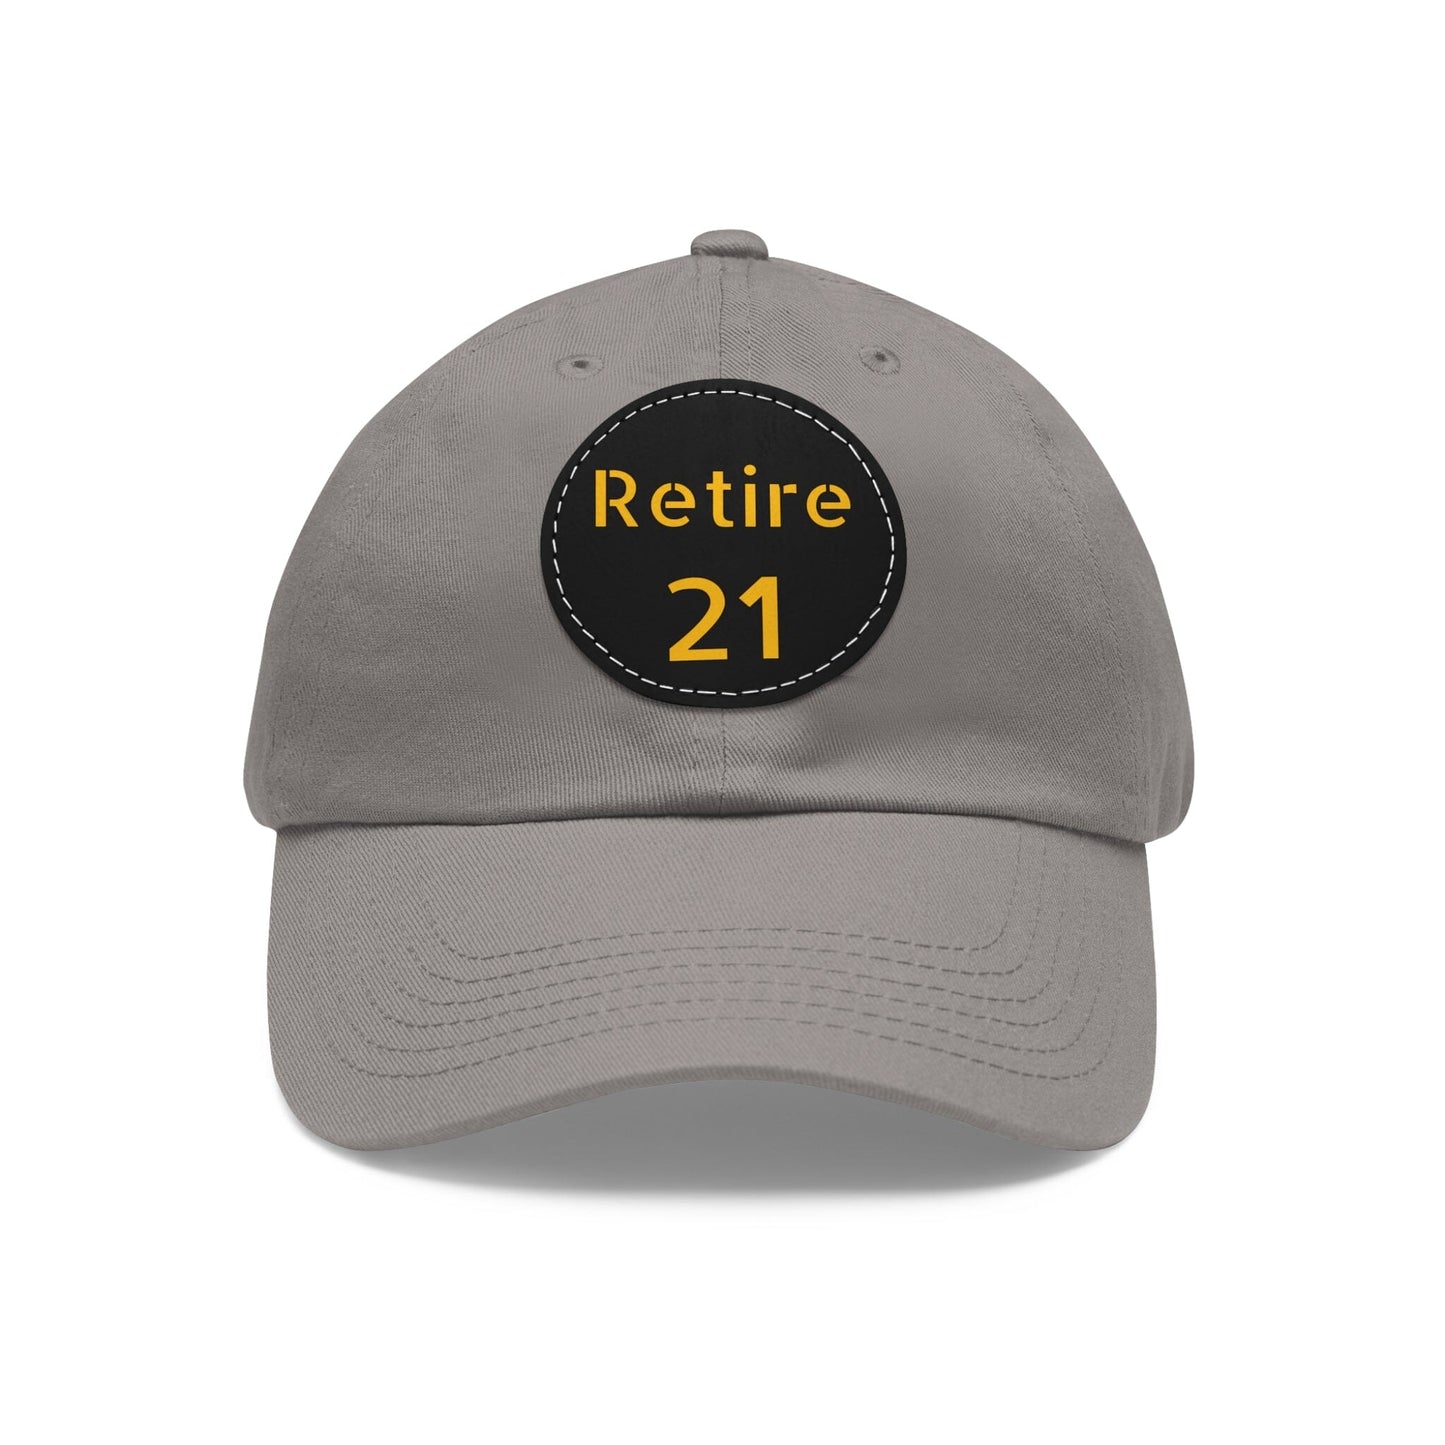 Retire 21 Hat With Leather Patch Hats Yinzergear Grey / Black patch Circle One size